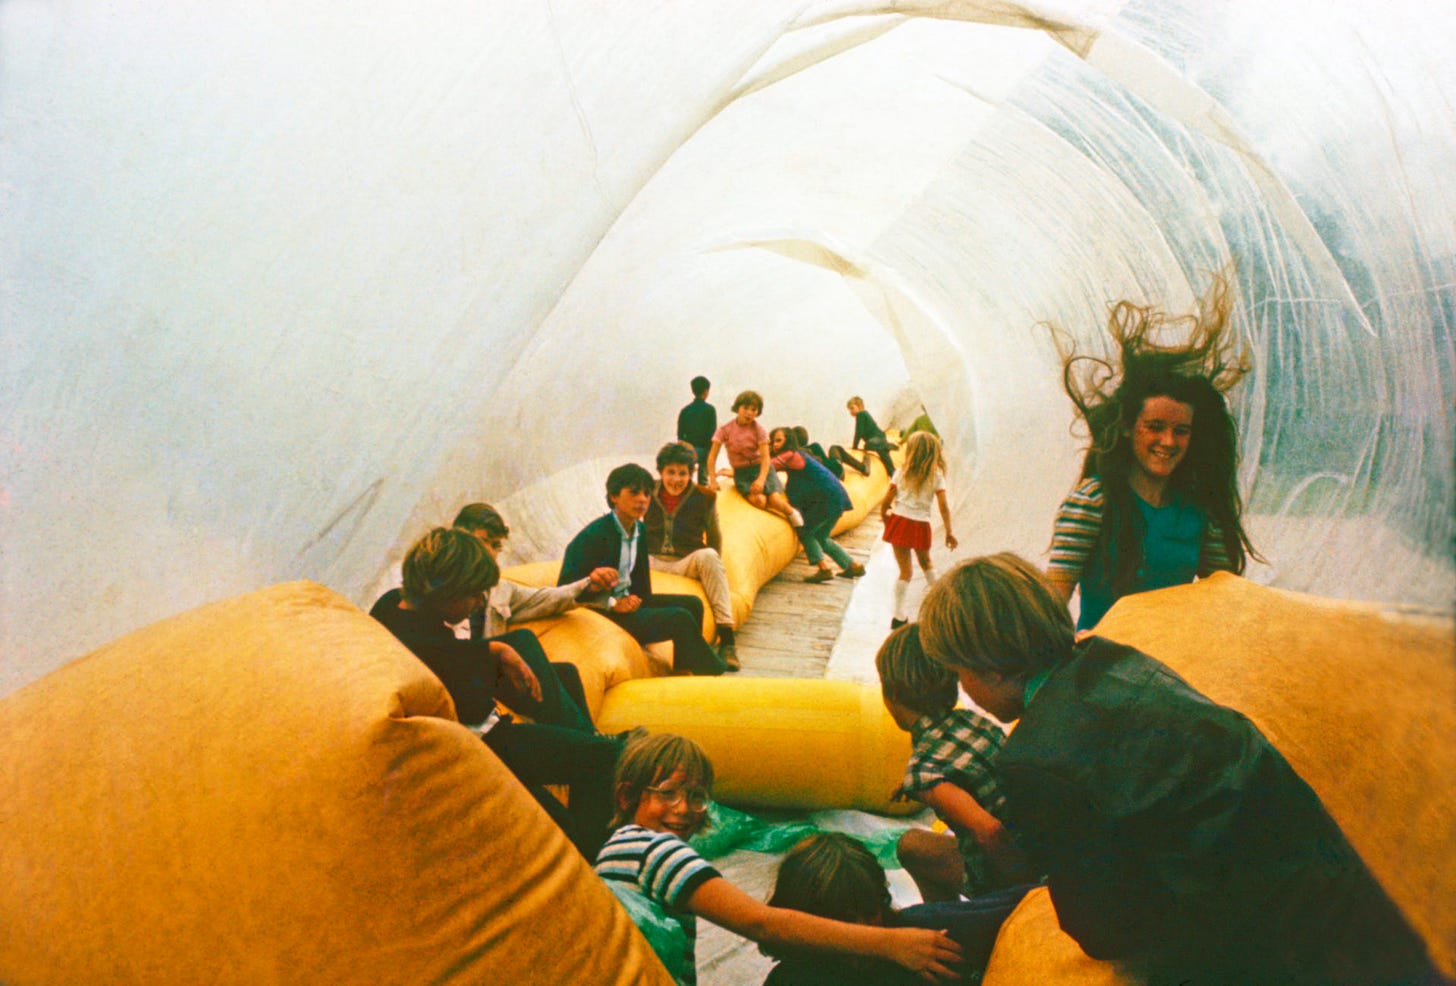 The Playful City: From the 1960s Strive for Spontaneity to Todayâs Space of Entertainment